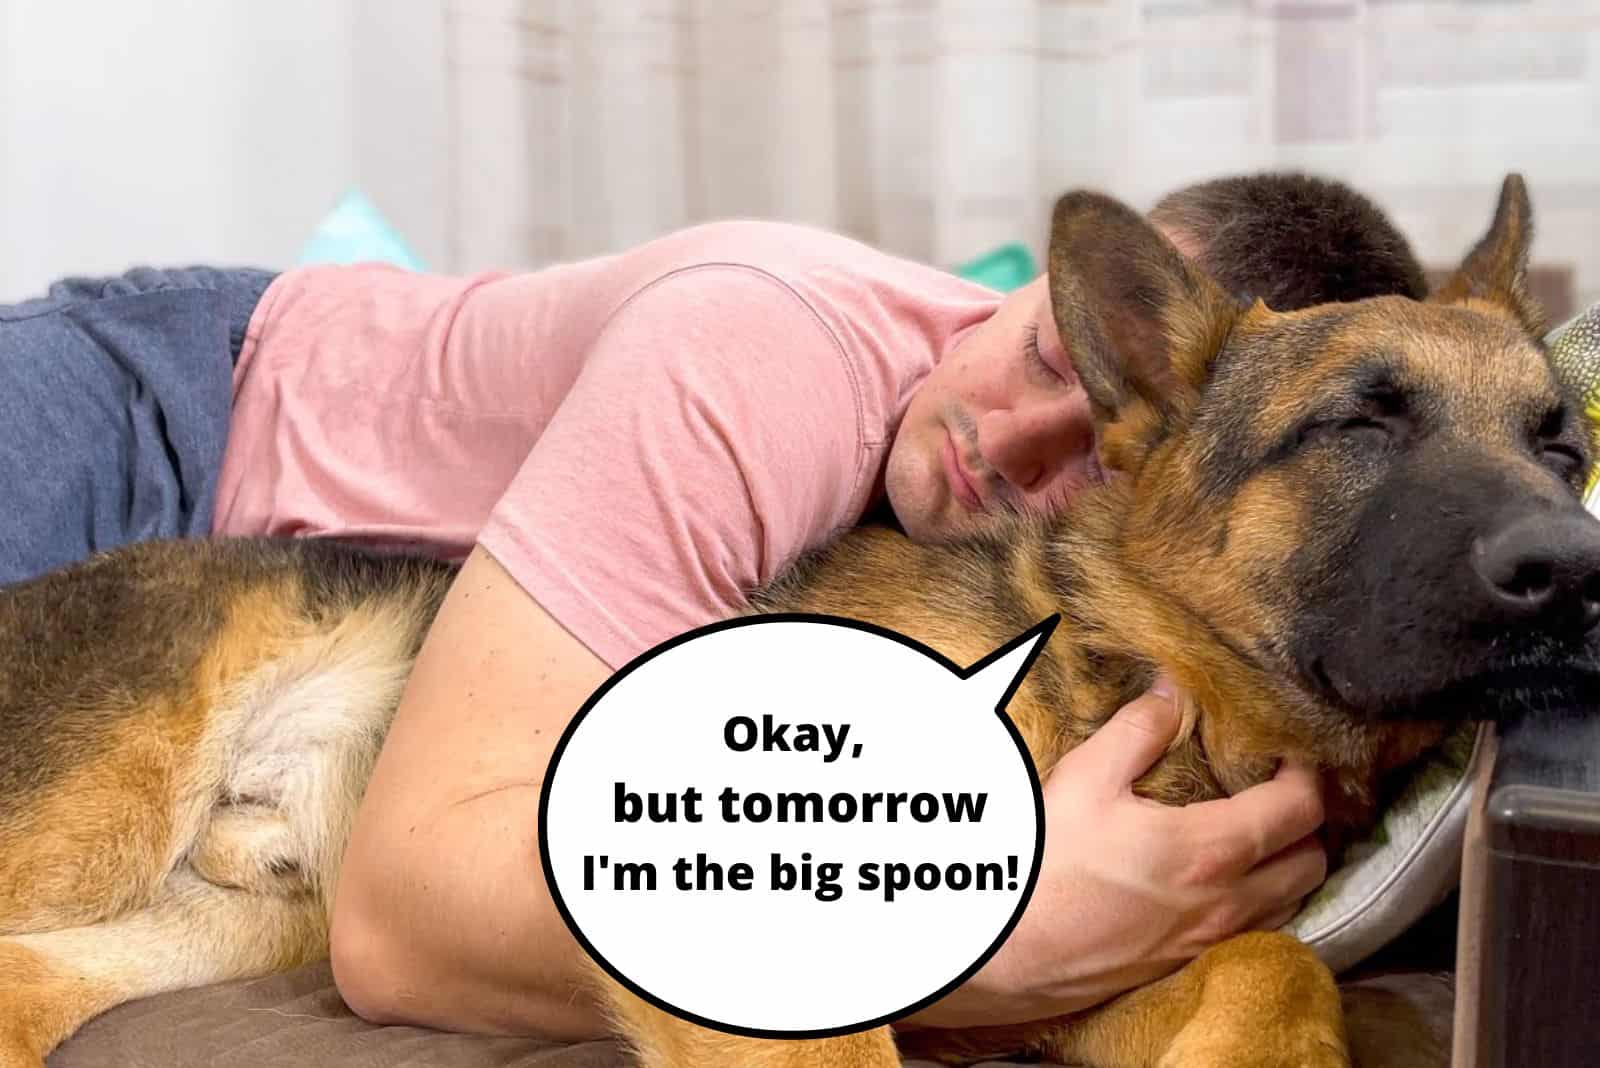 woman sleeps next to her gsd